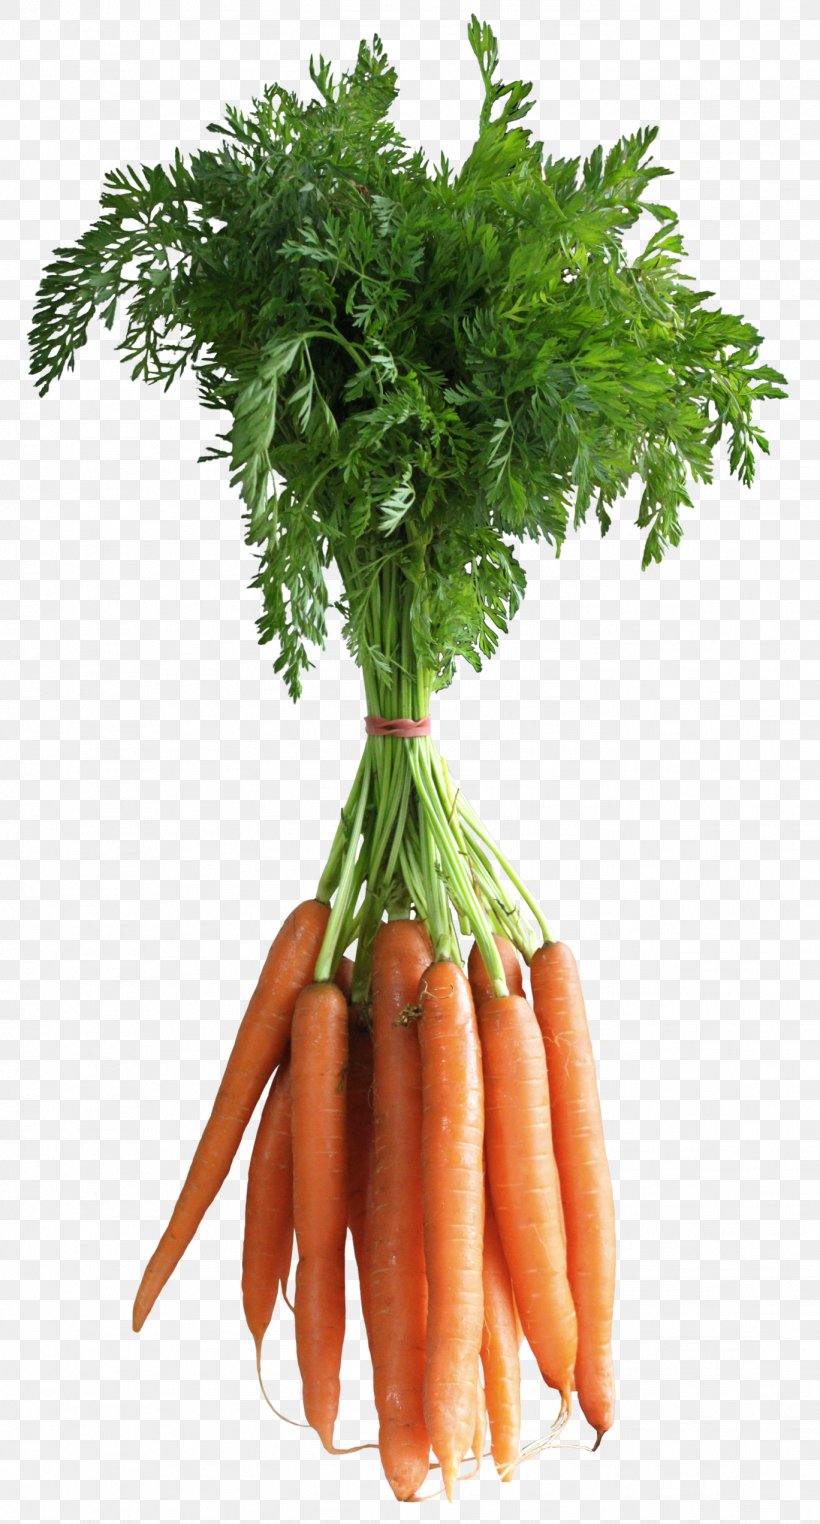 Carrot Clip Art, PNG, 1368x2544px, Carrot, Baby Carrot, Cabbage, Carrot Juice, Cauliflower Download Free